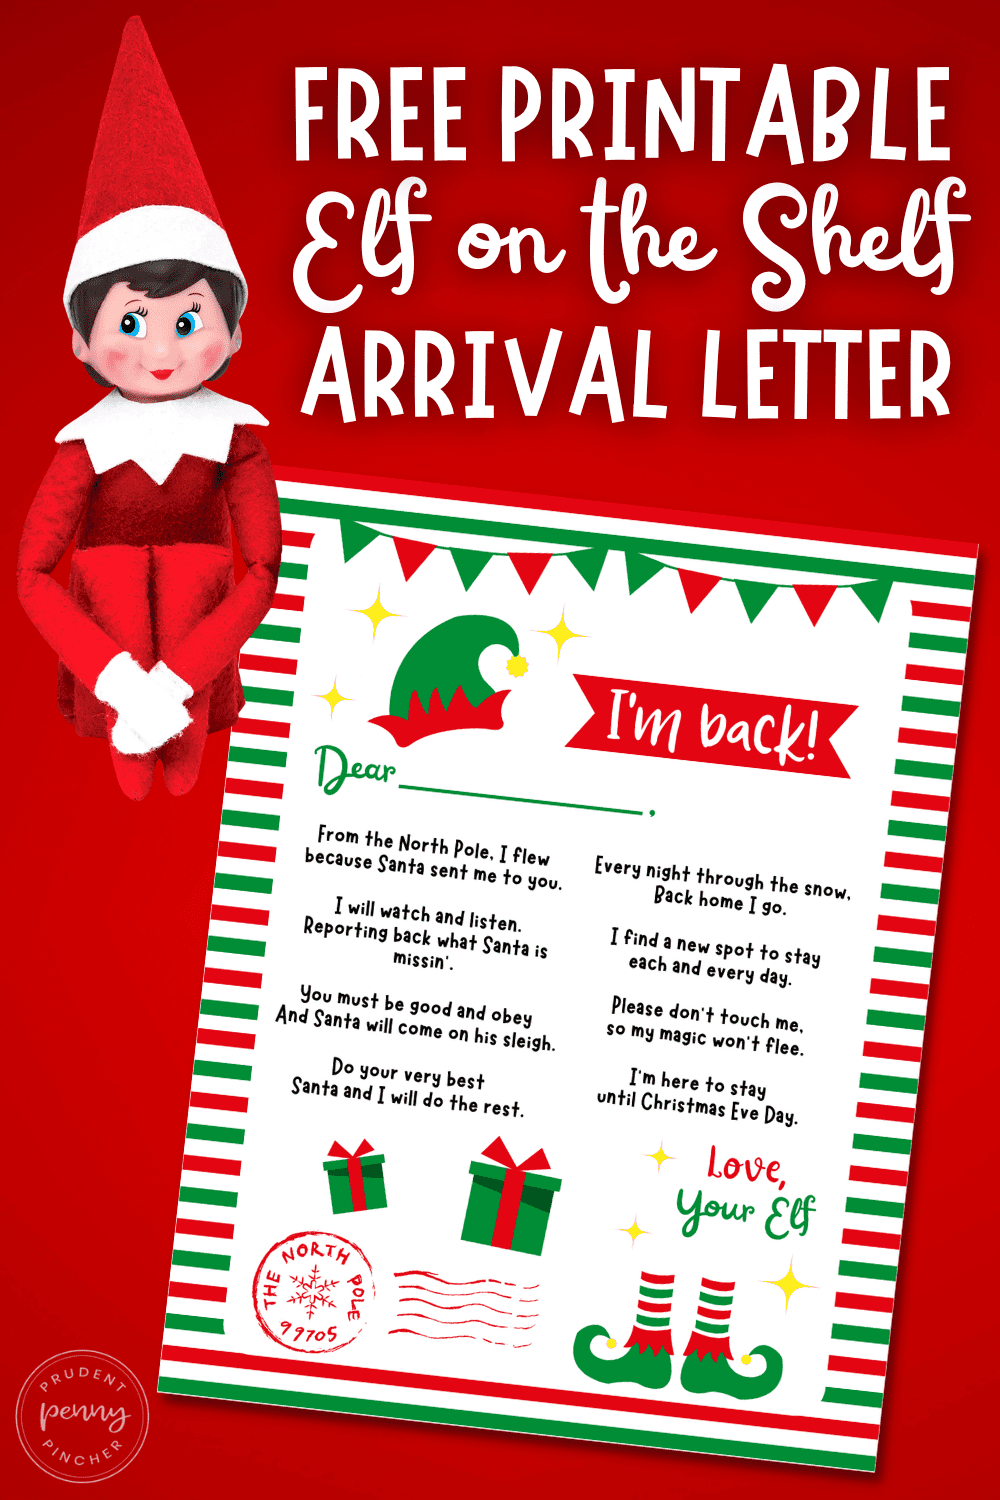 Elf on the Shelf Free Printable Arrival Letter · opsafetynow